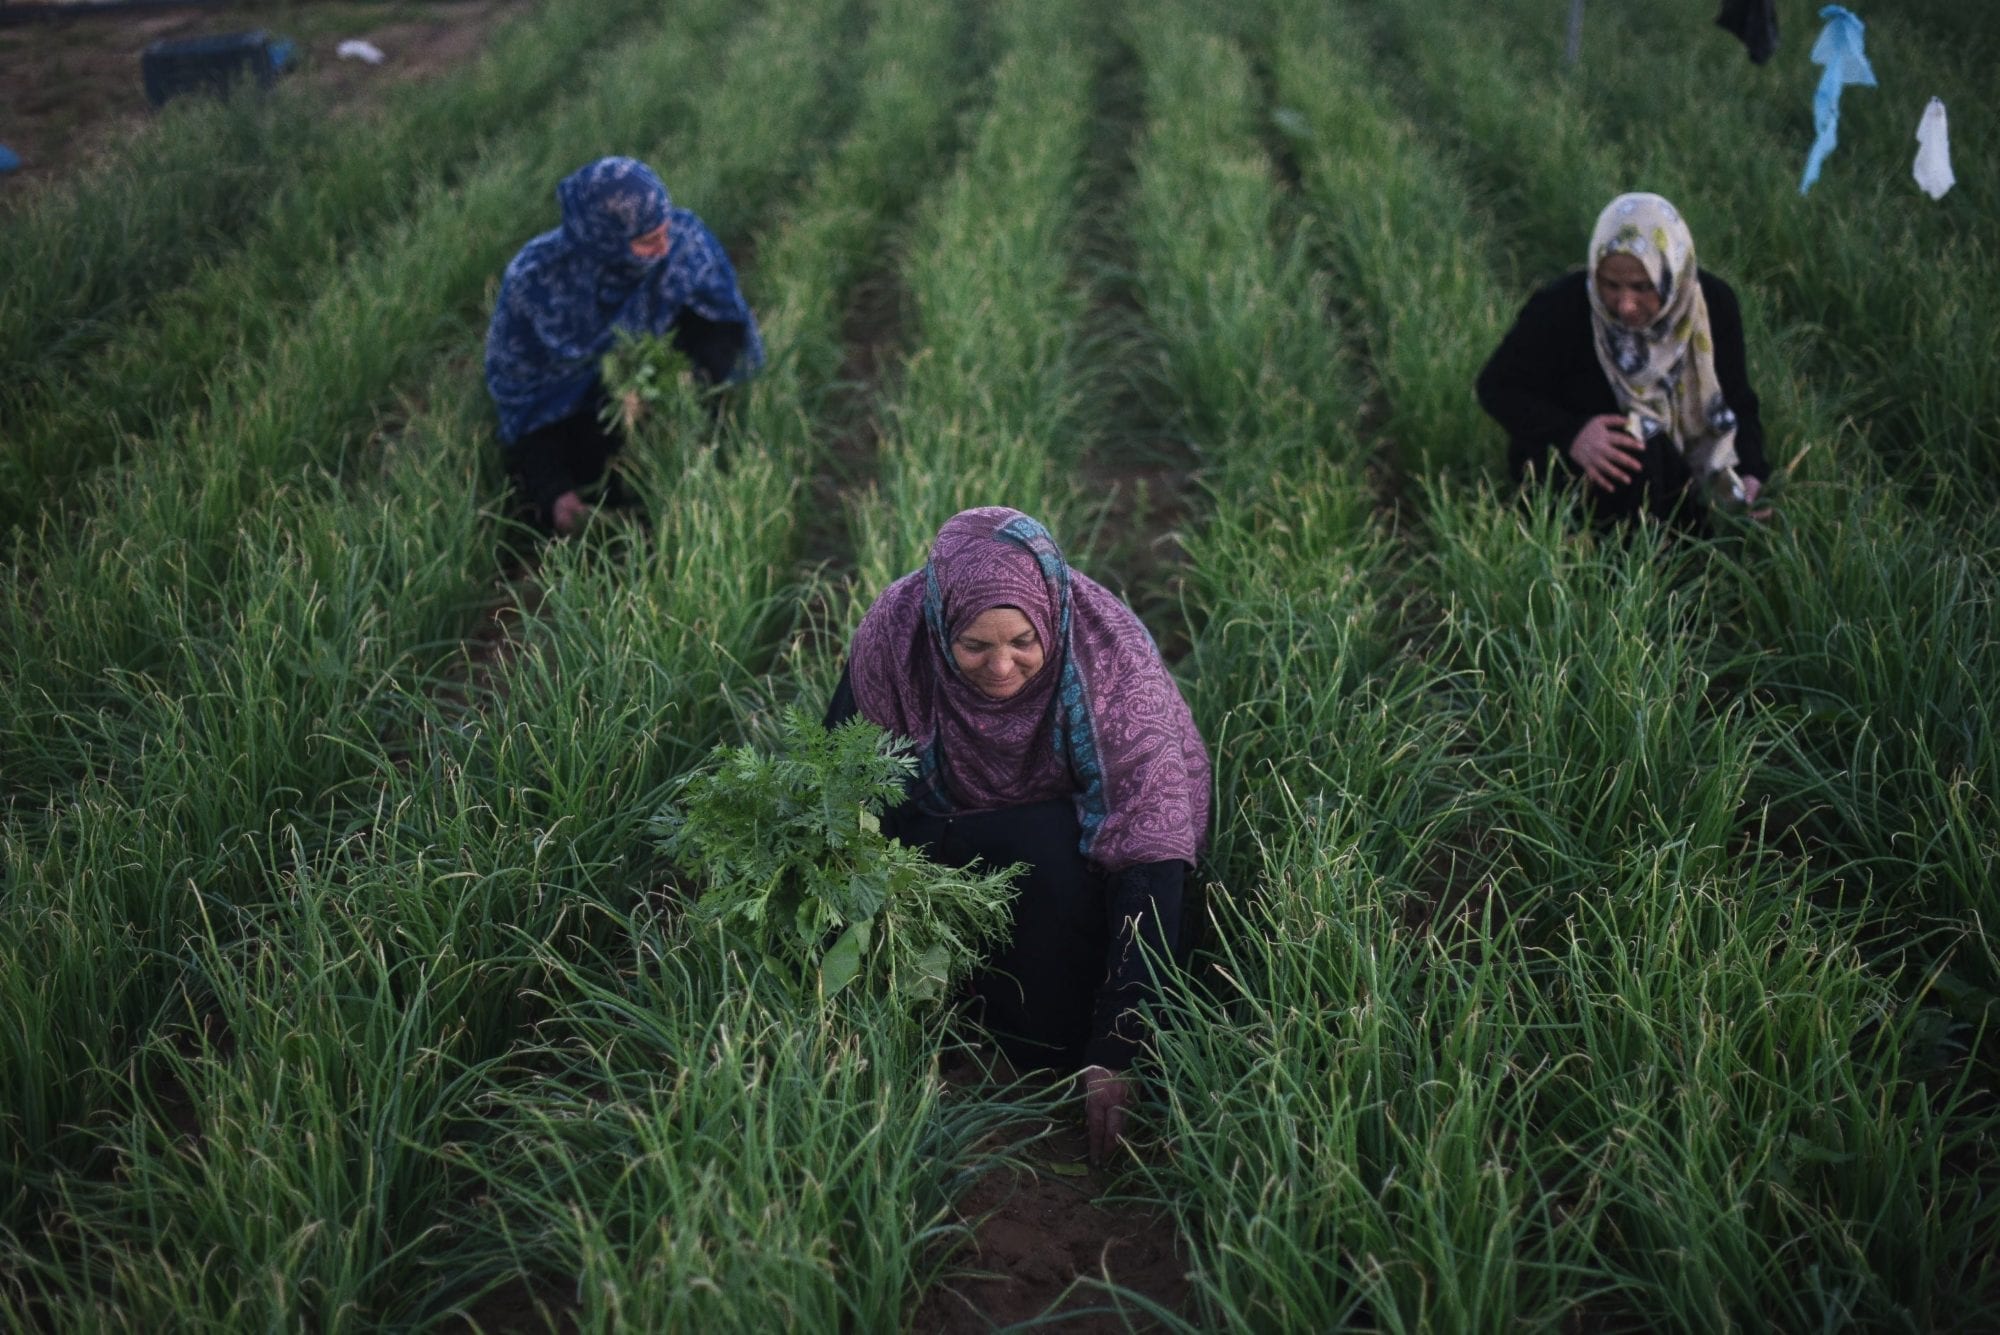 Gaza, Solidarity Center, worker rights, Palestine, farmworker, agricultural worker